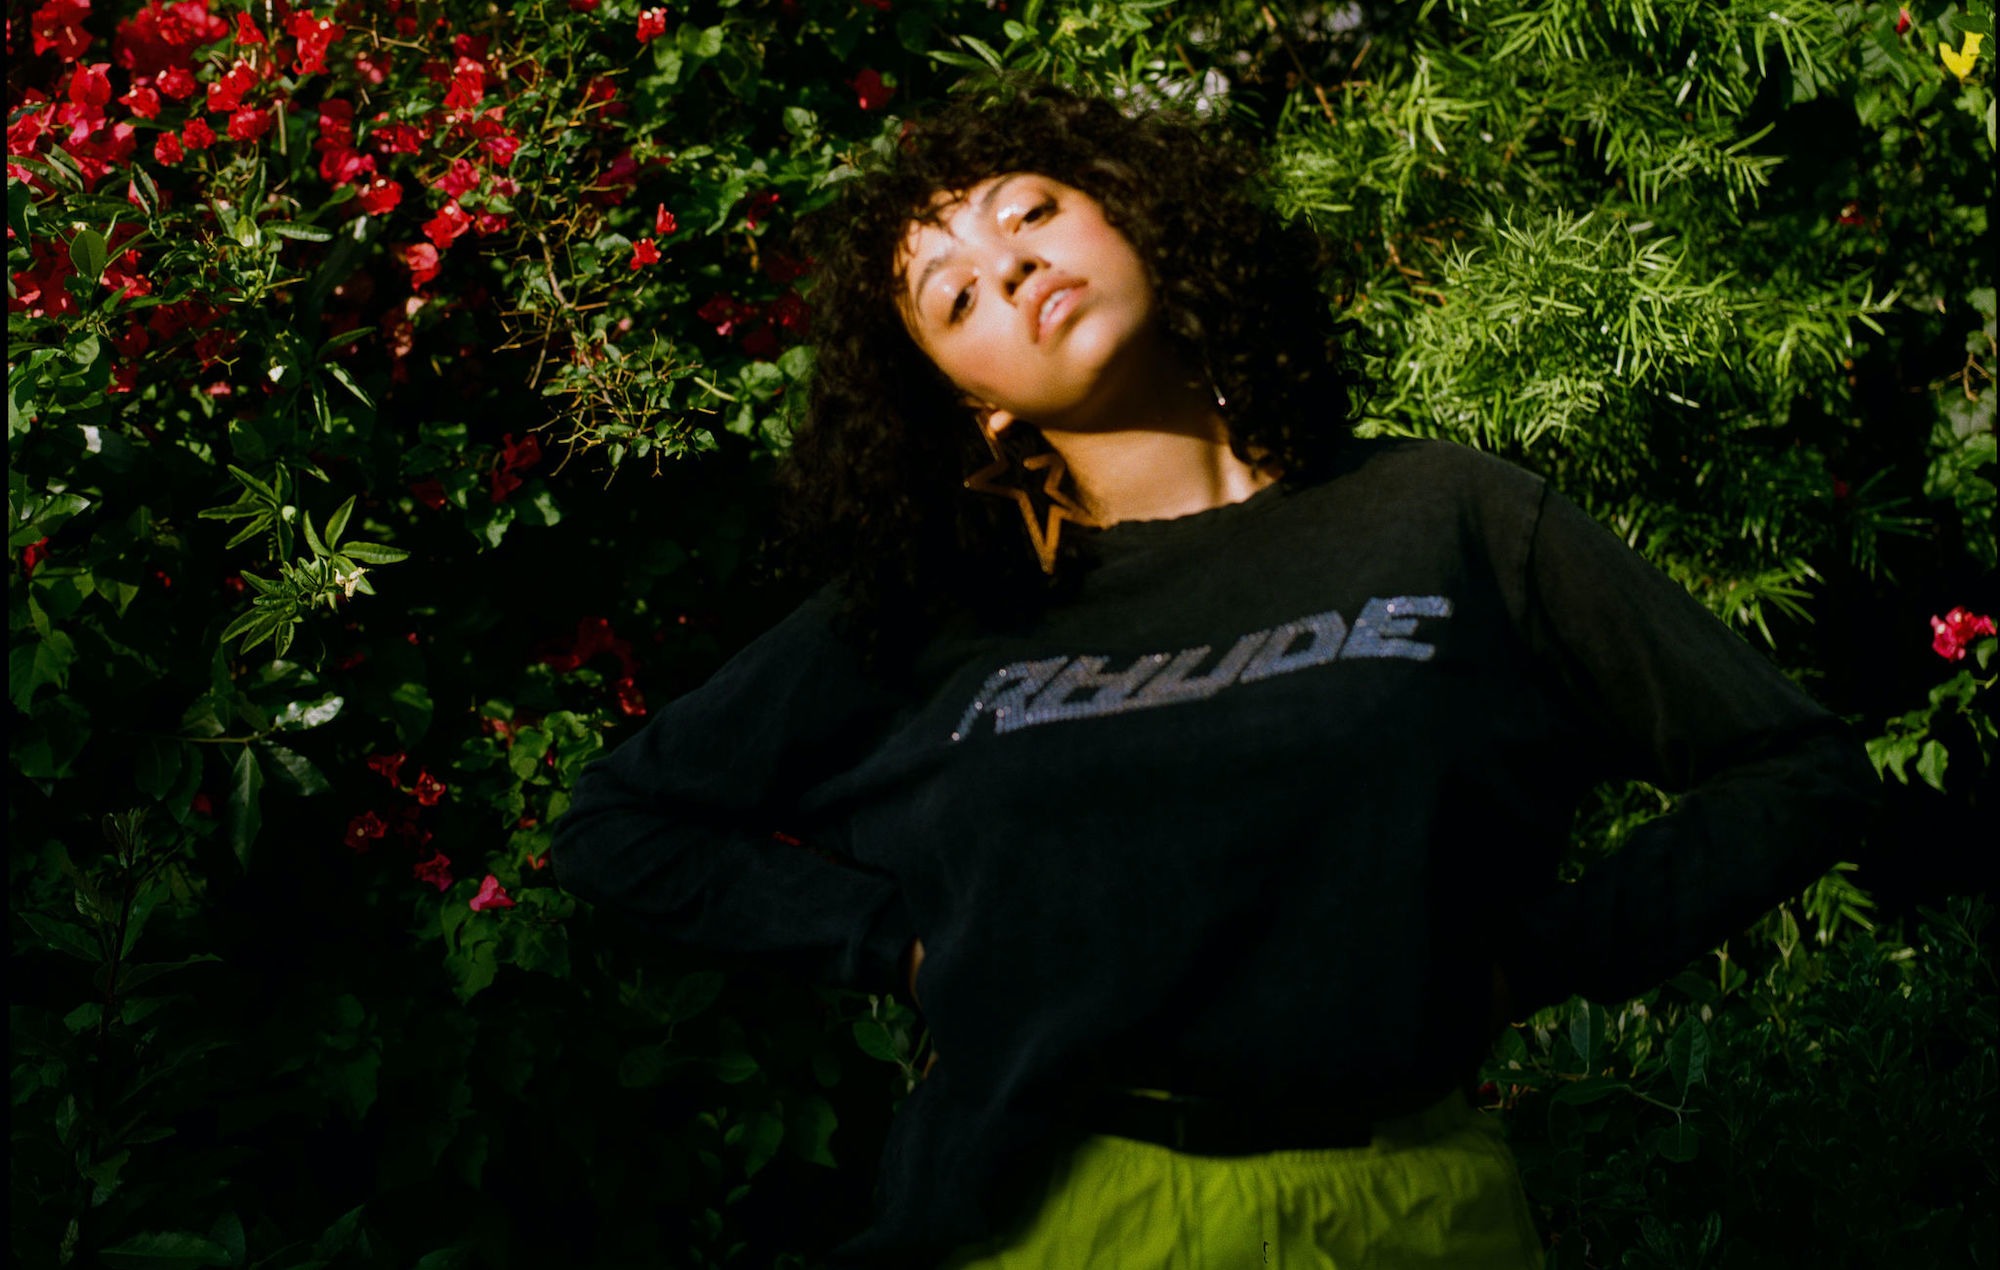 Mahalia talks surprise ‘Isolation Tapes’ EP release: “I don’t want to compromise on who I am”